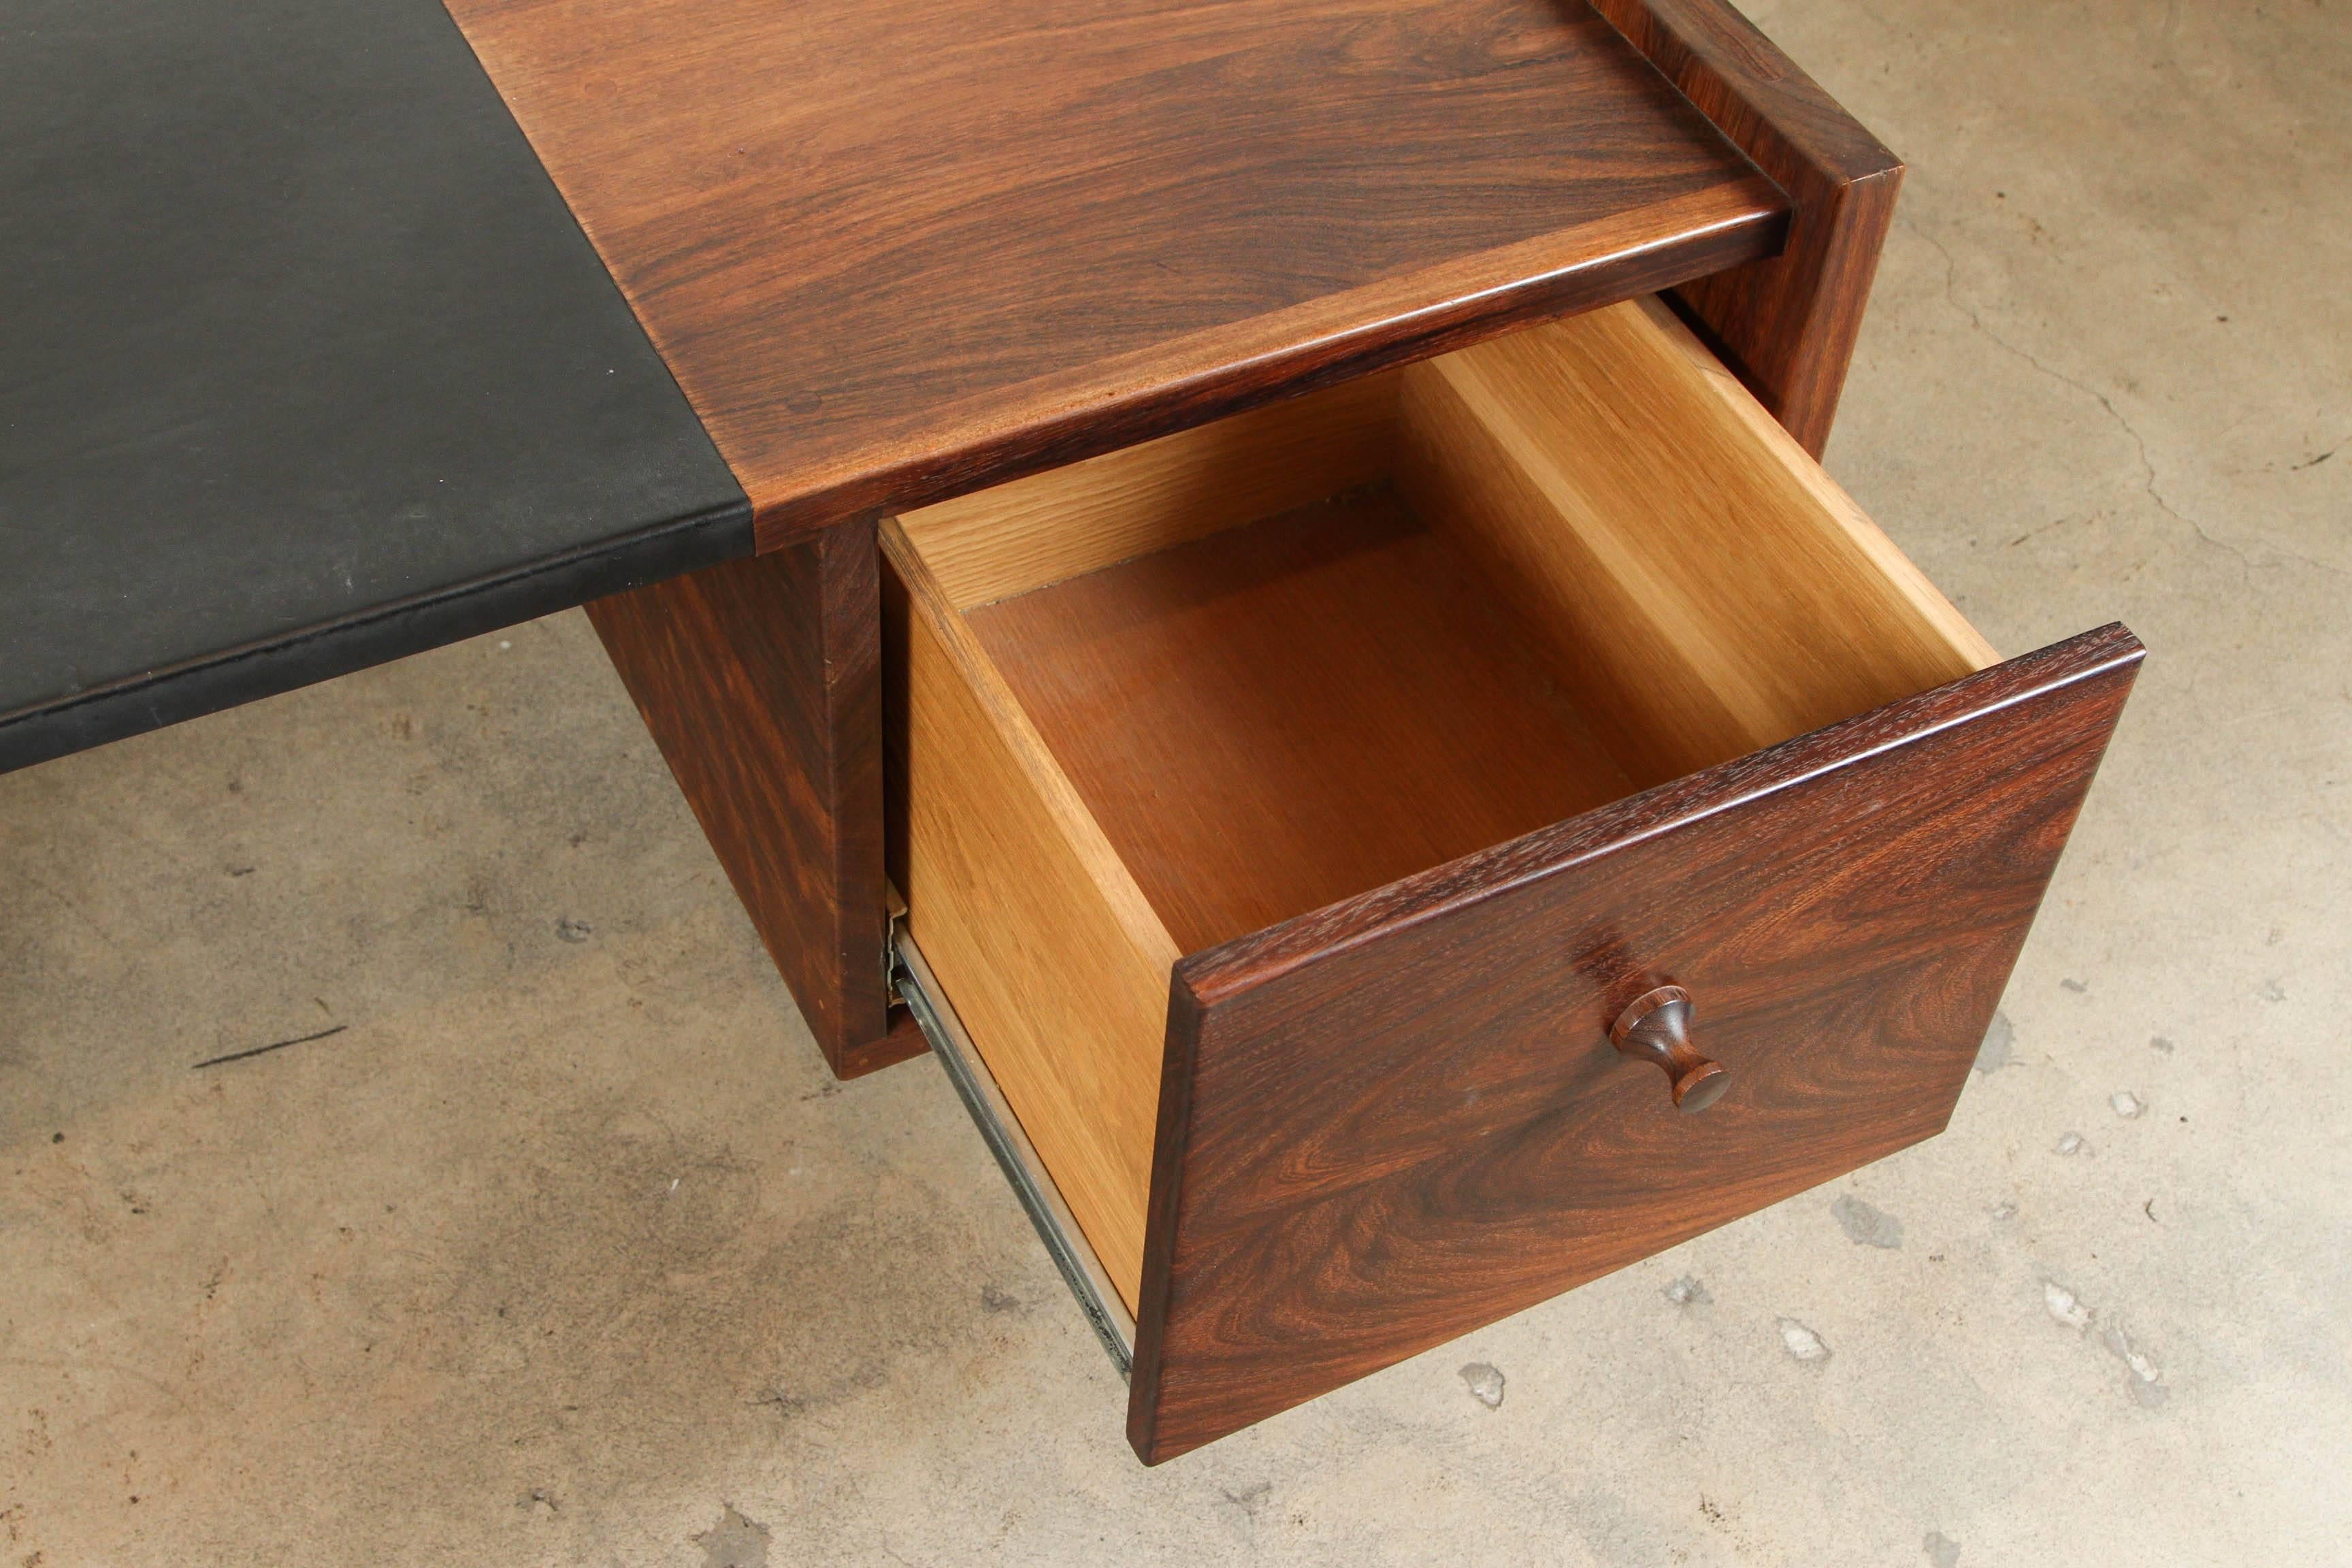 Solid Walnut and Leather Desk by John Nyquist 1